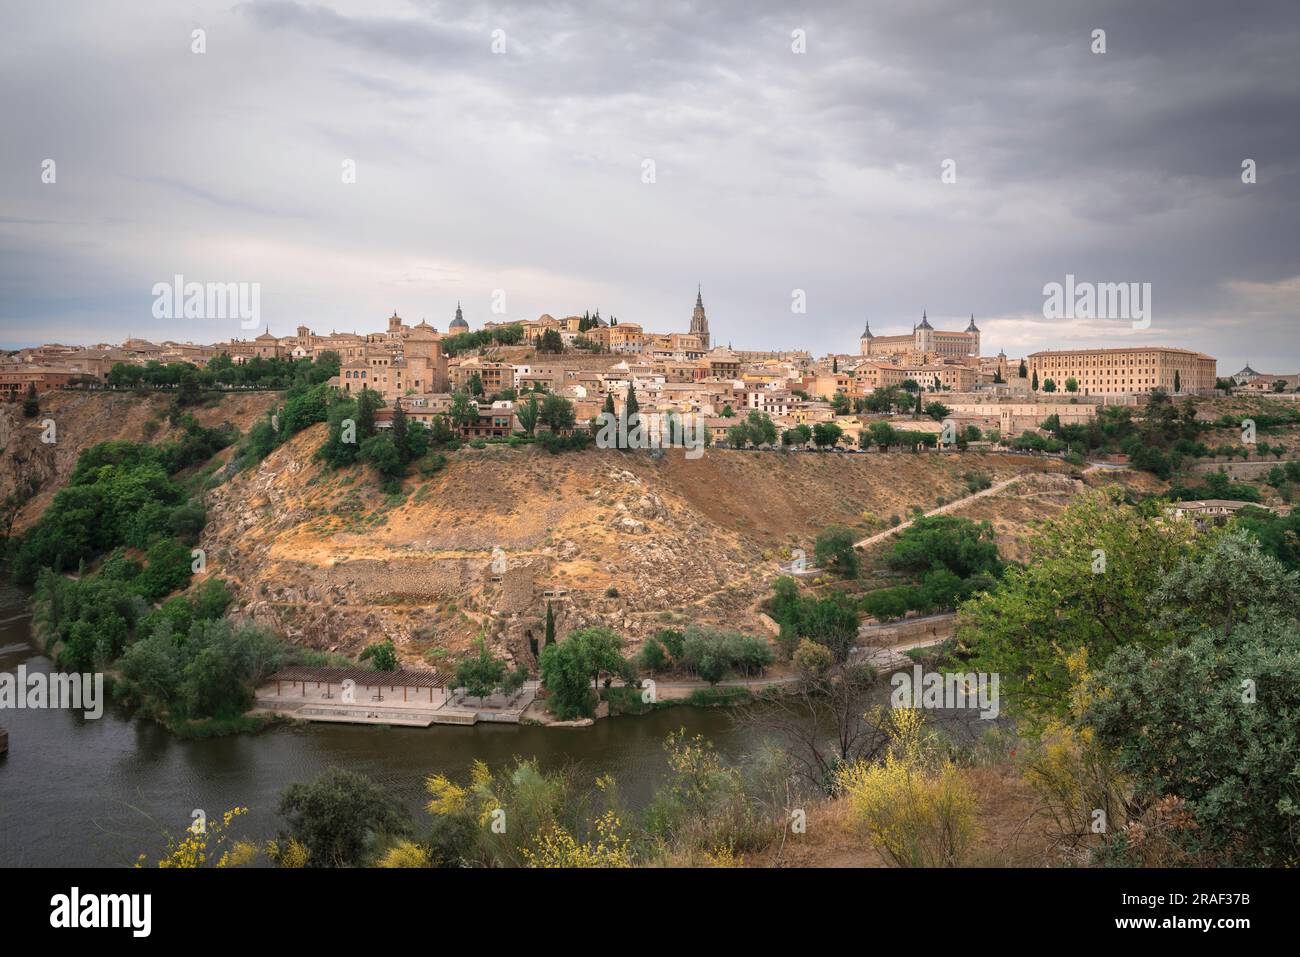 Toledo city, view in dramatic light of the historic city of Toledo sited on a hill above the Tagus River, Central Spain Stock Photo